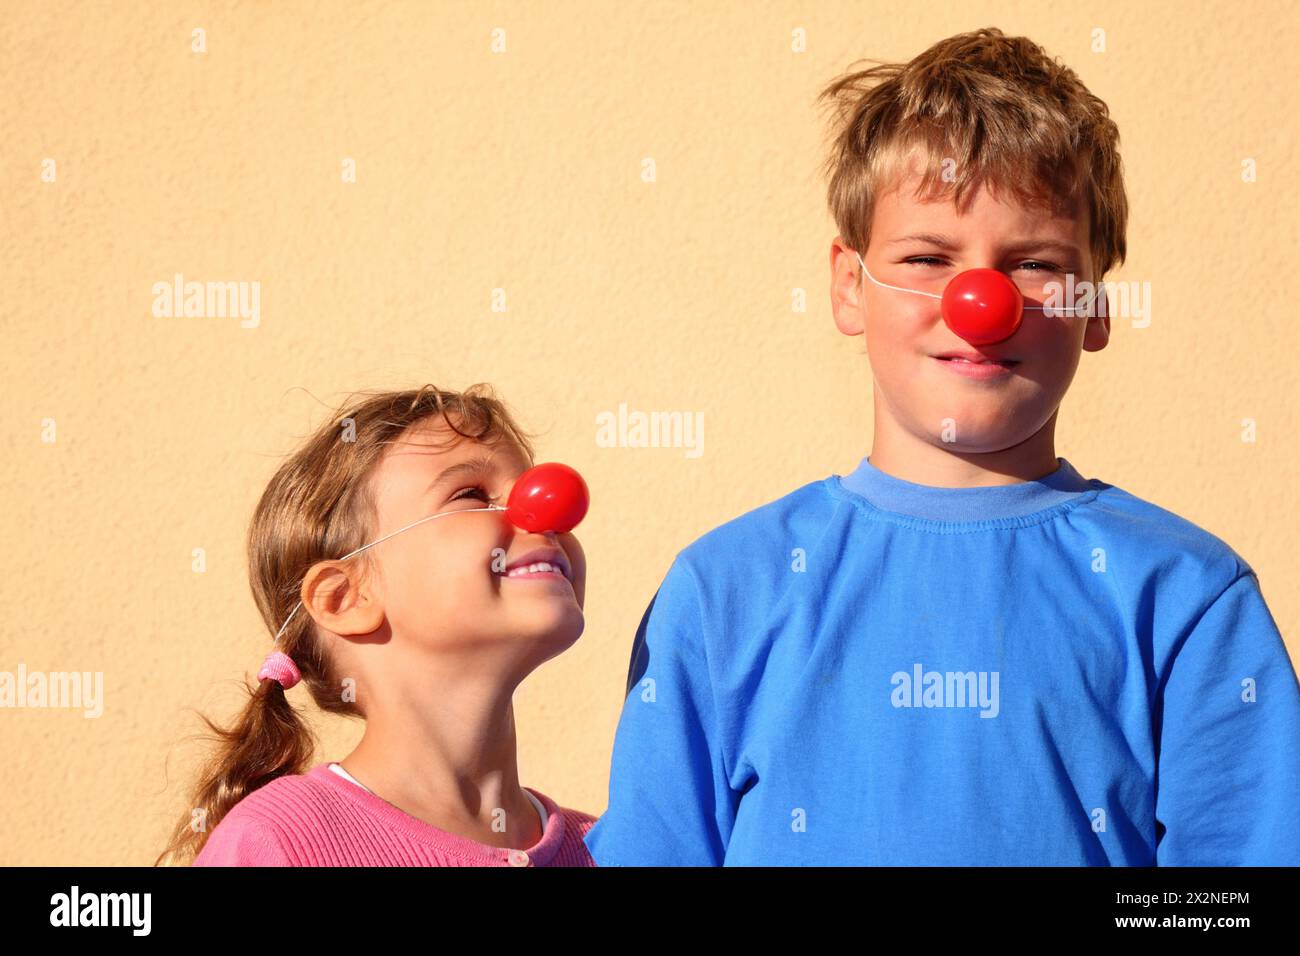 Brother and sister with red clown noses stand near wall and smiles. Girl looks at boy. Stock Photo